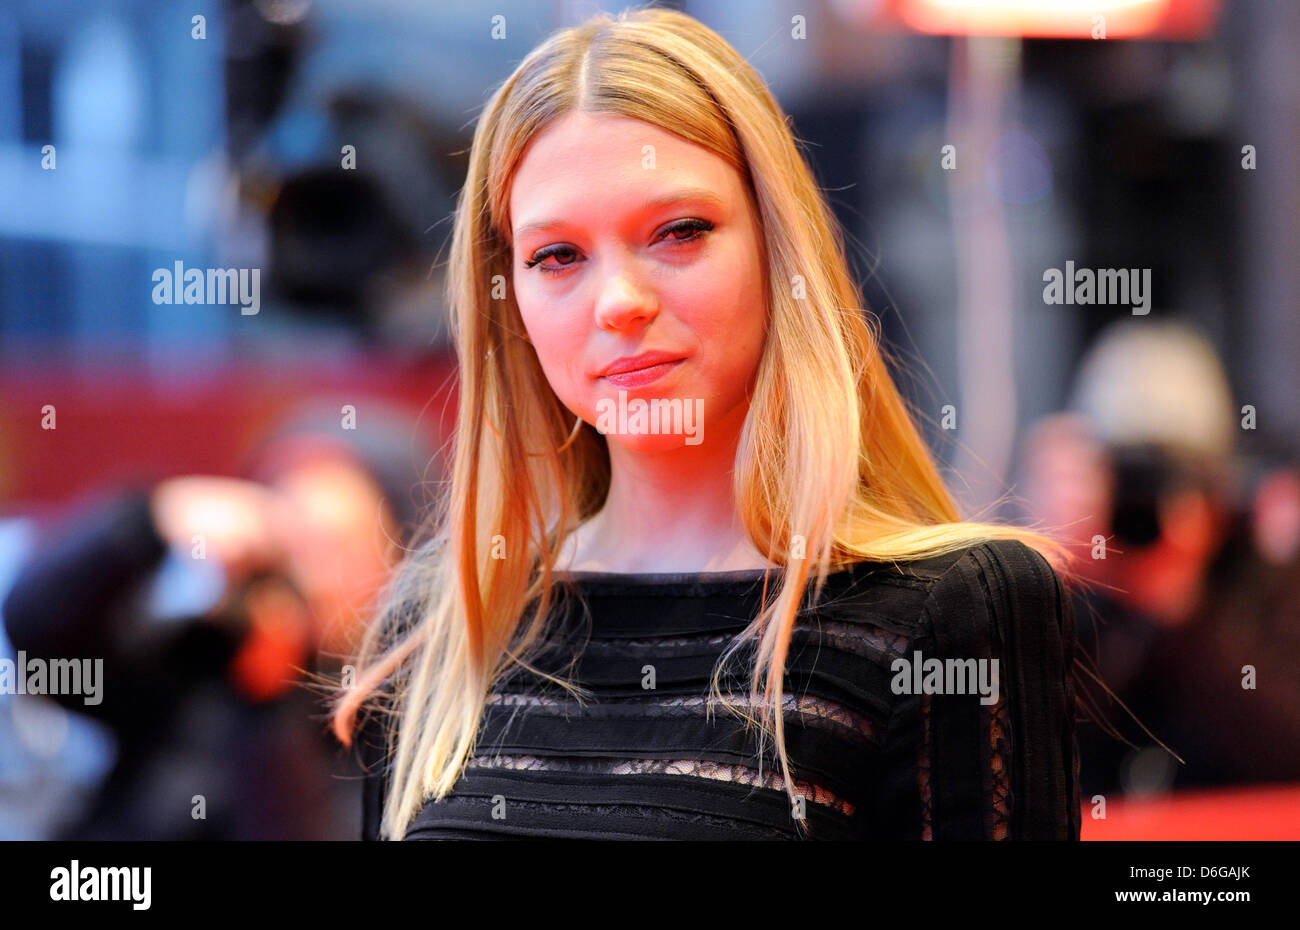 French actress Lea Seydoux arrives for the premiere of the movie Sister  ('L'enfant D'en Haut') during the 62nd Berlin International Film Festival,  in Berlin, Germany, 13 February 2012. The movie is presented